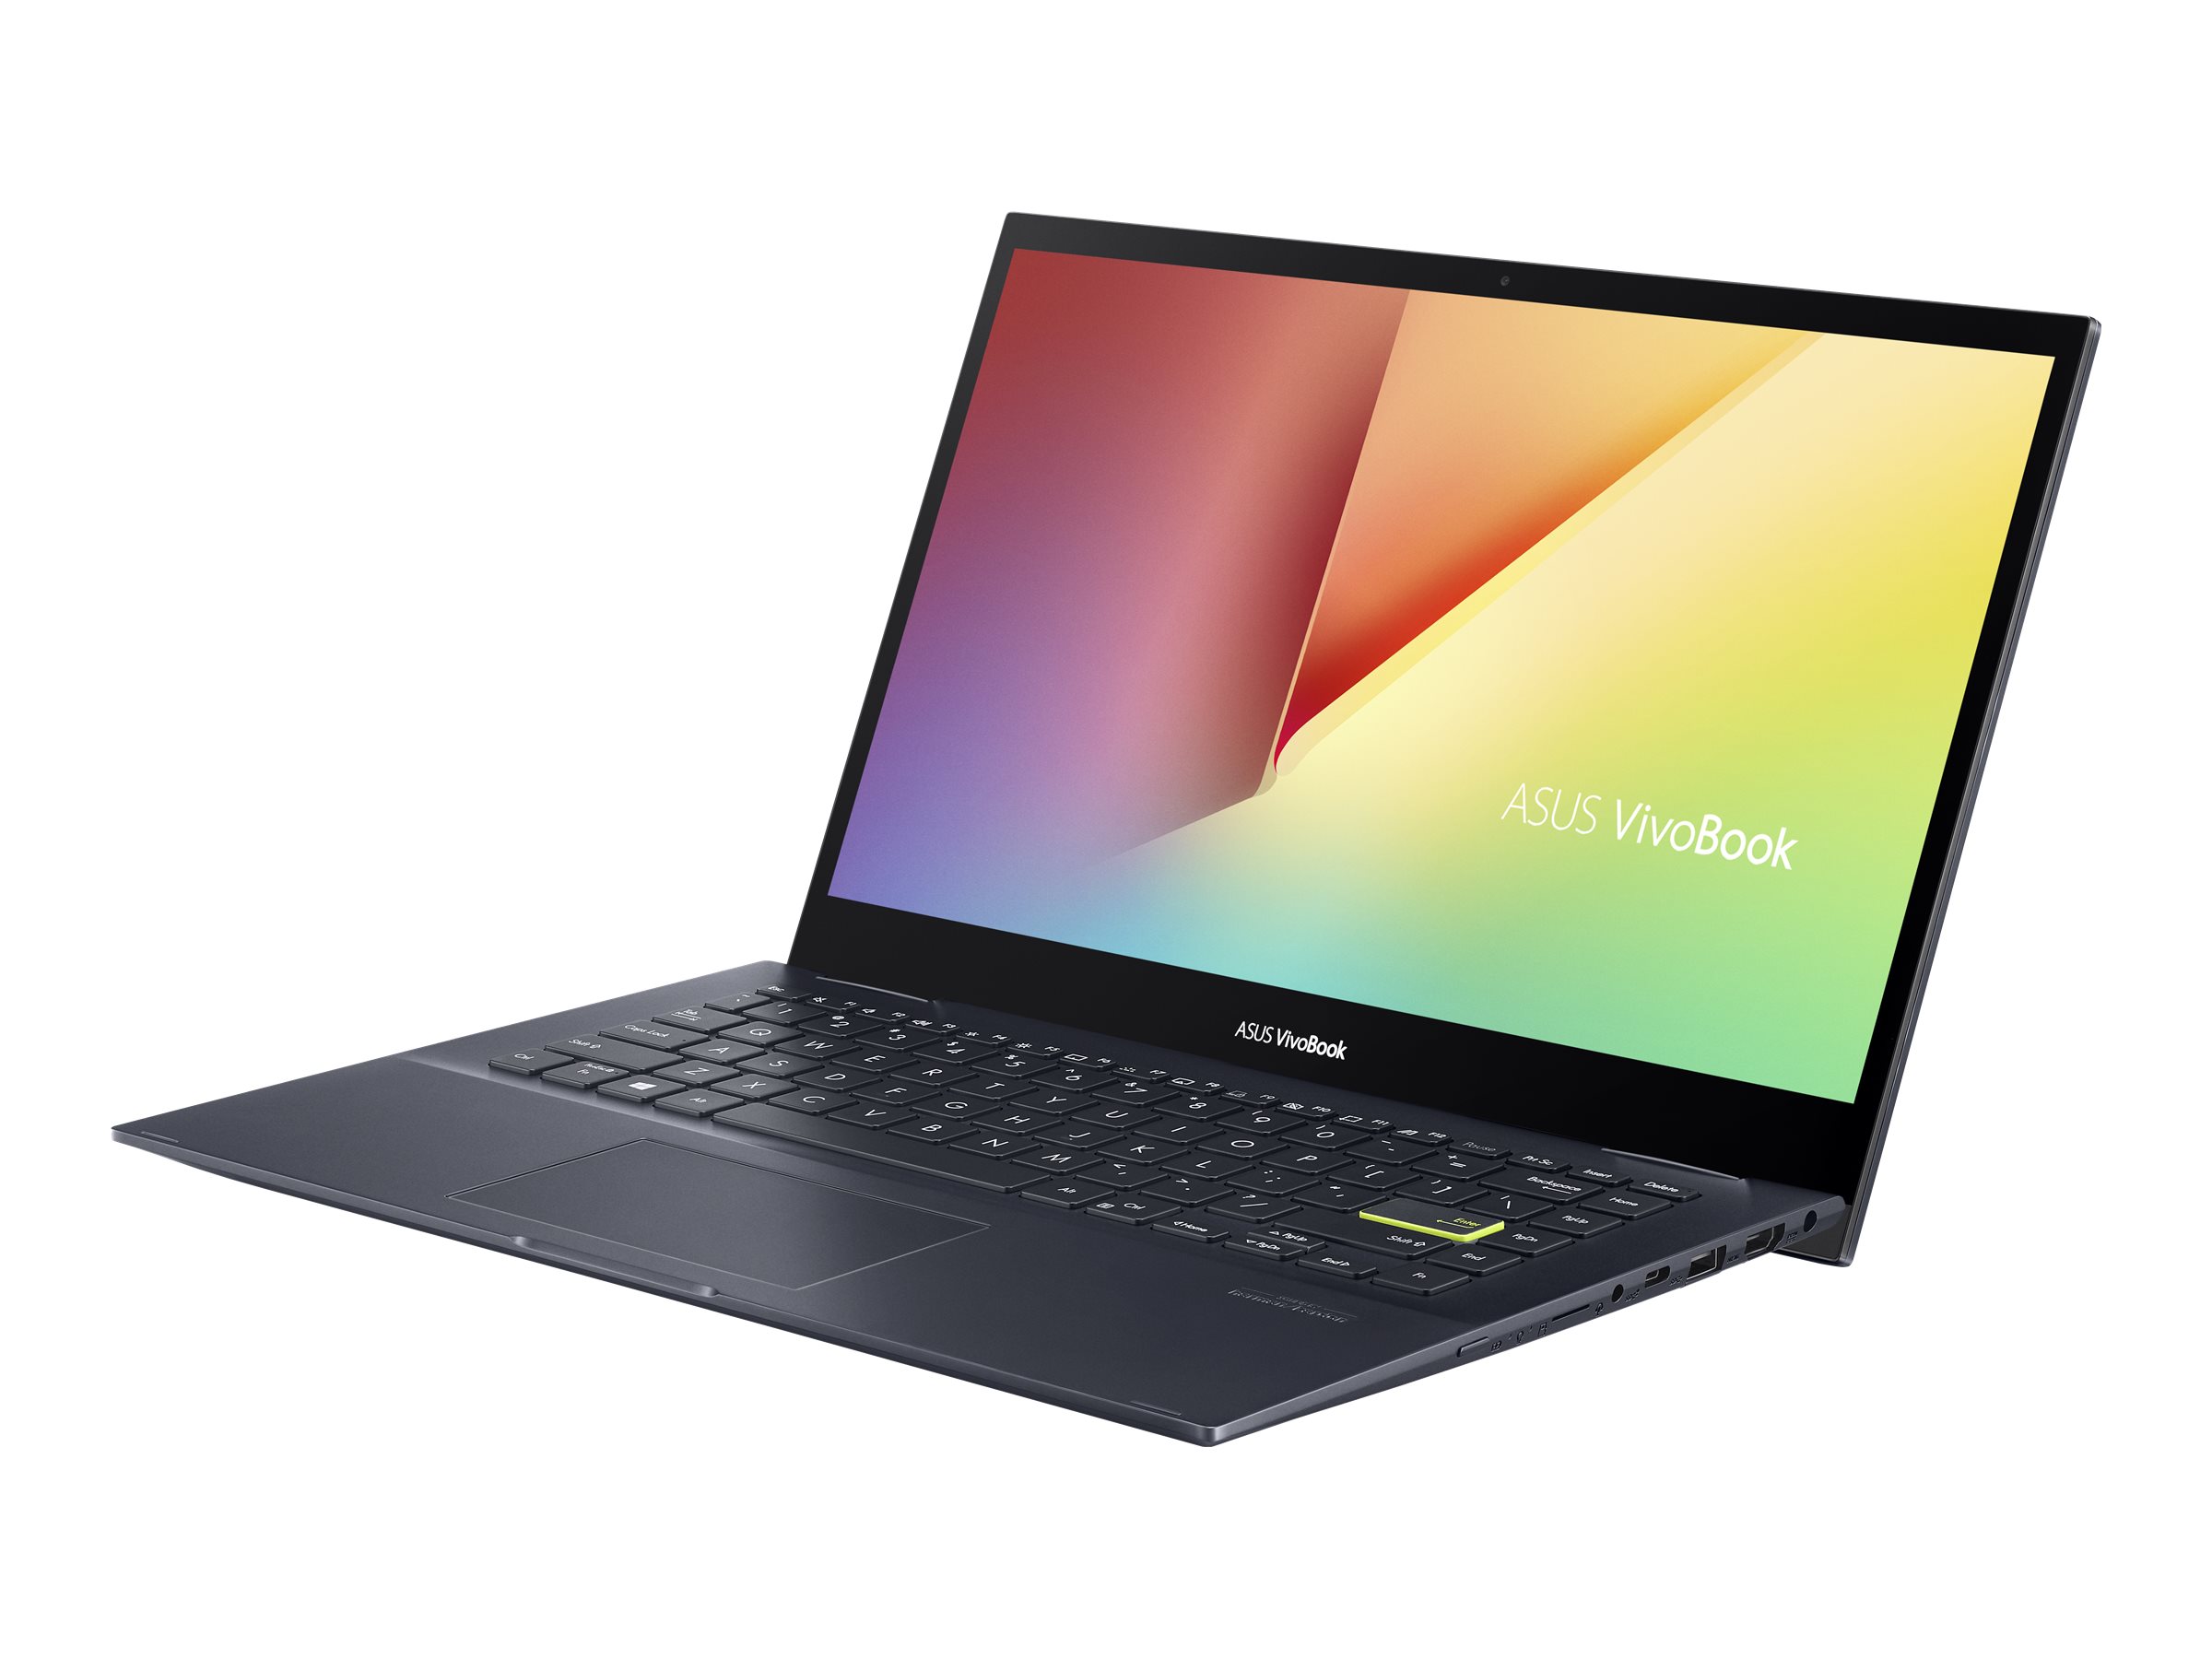 ASUS Chromebook CX1 (CX1700CKA) - full specs, details and review